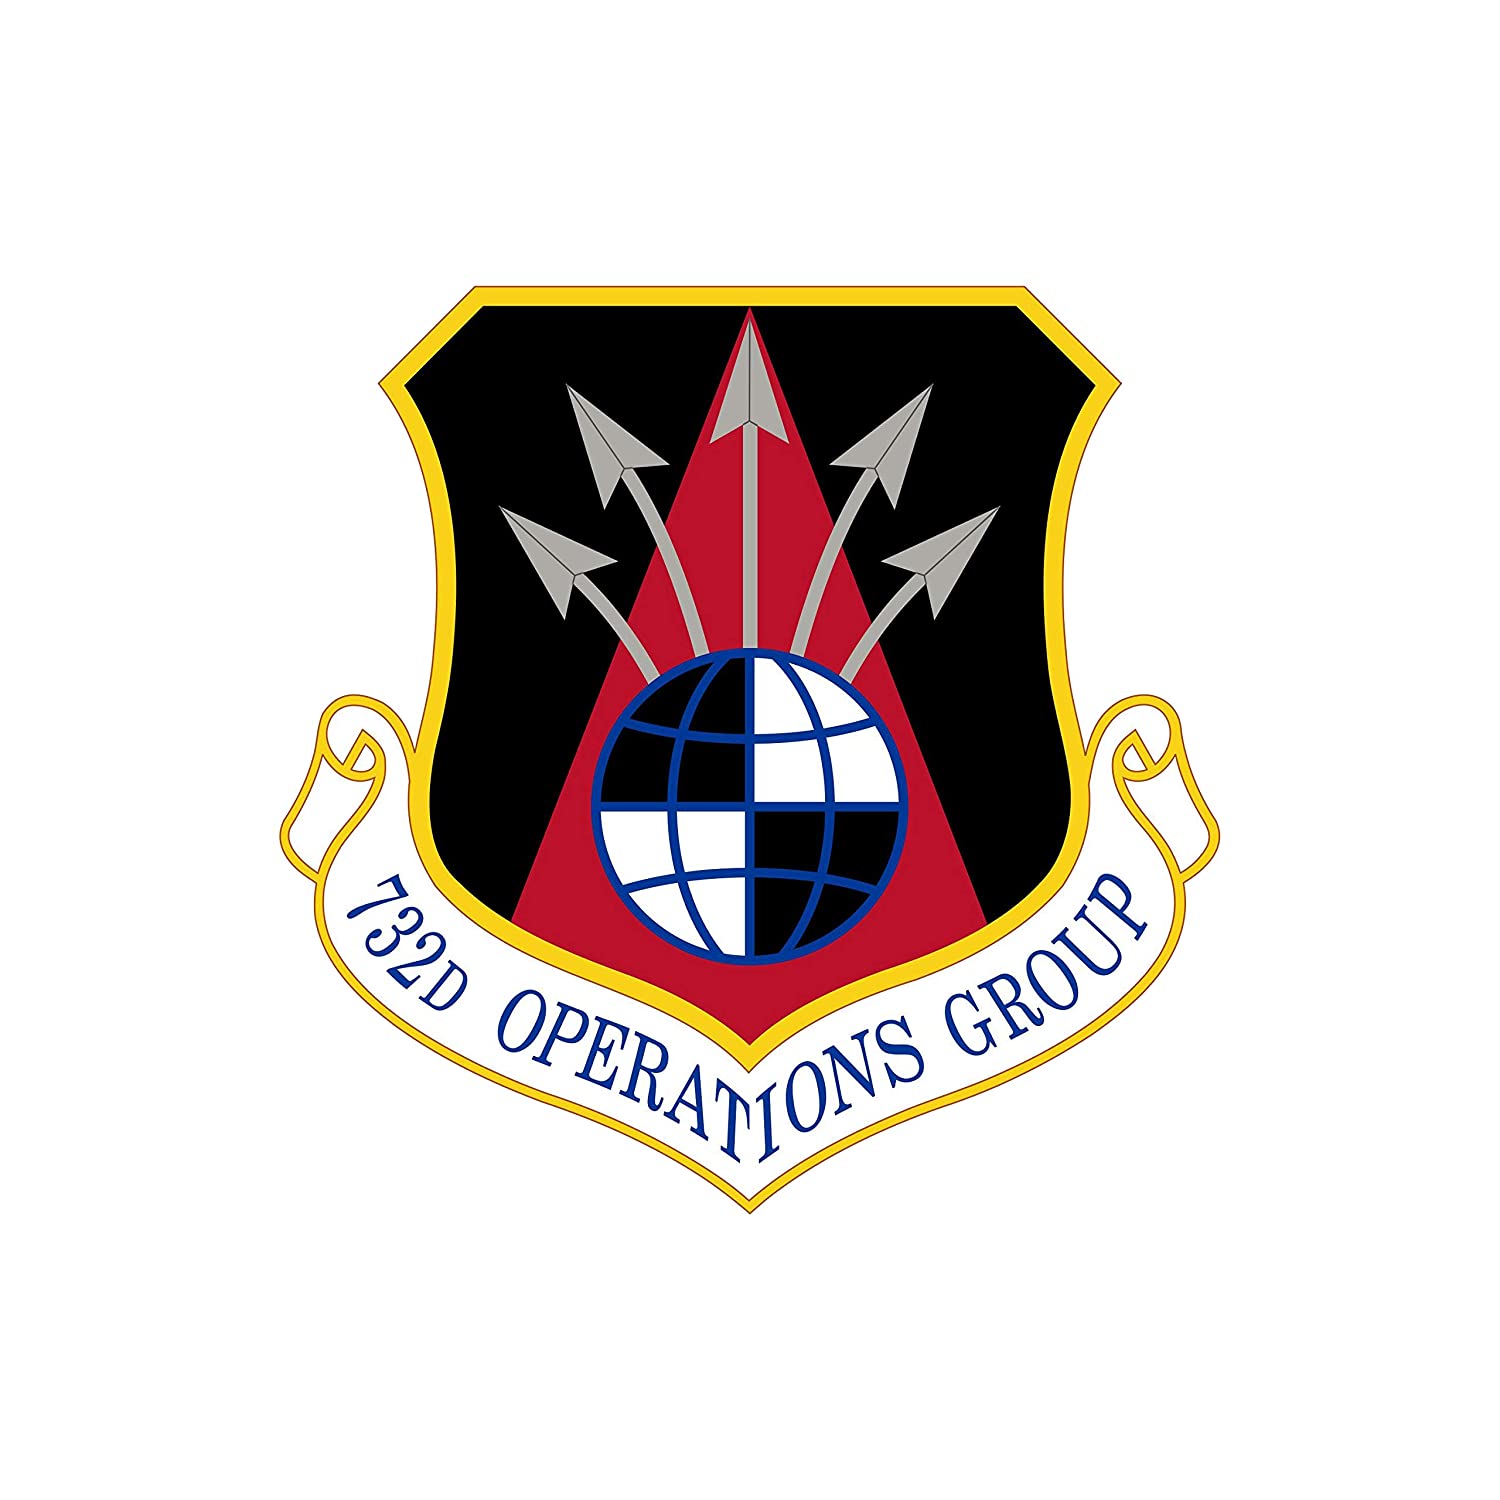 732nd Operations Group Squadron - Patch Vinyl Decal - Available in Multiple Sizes